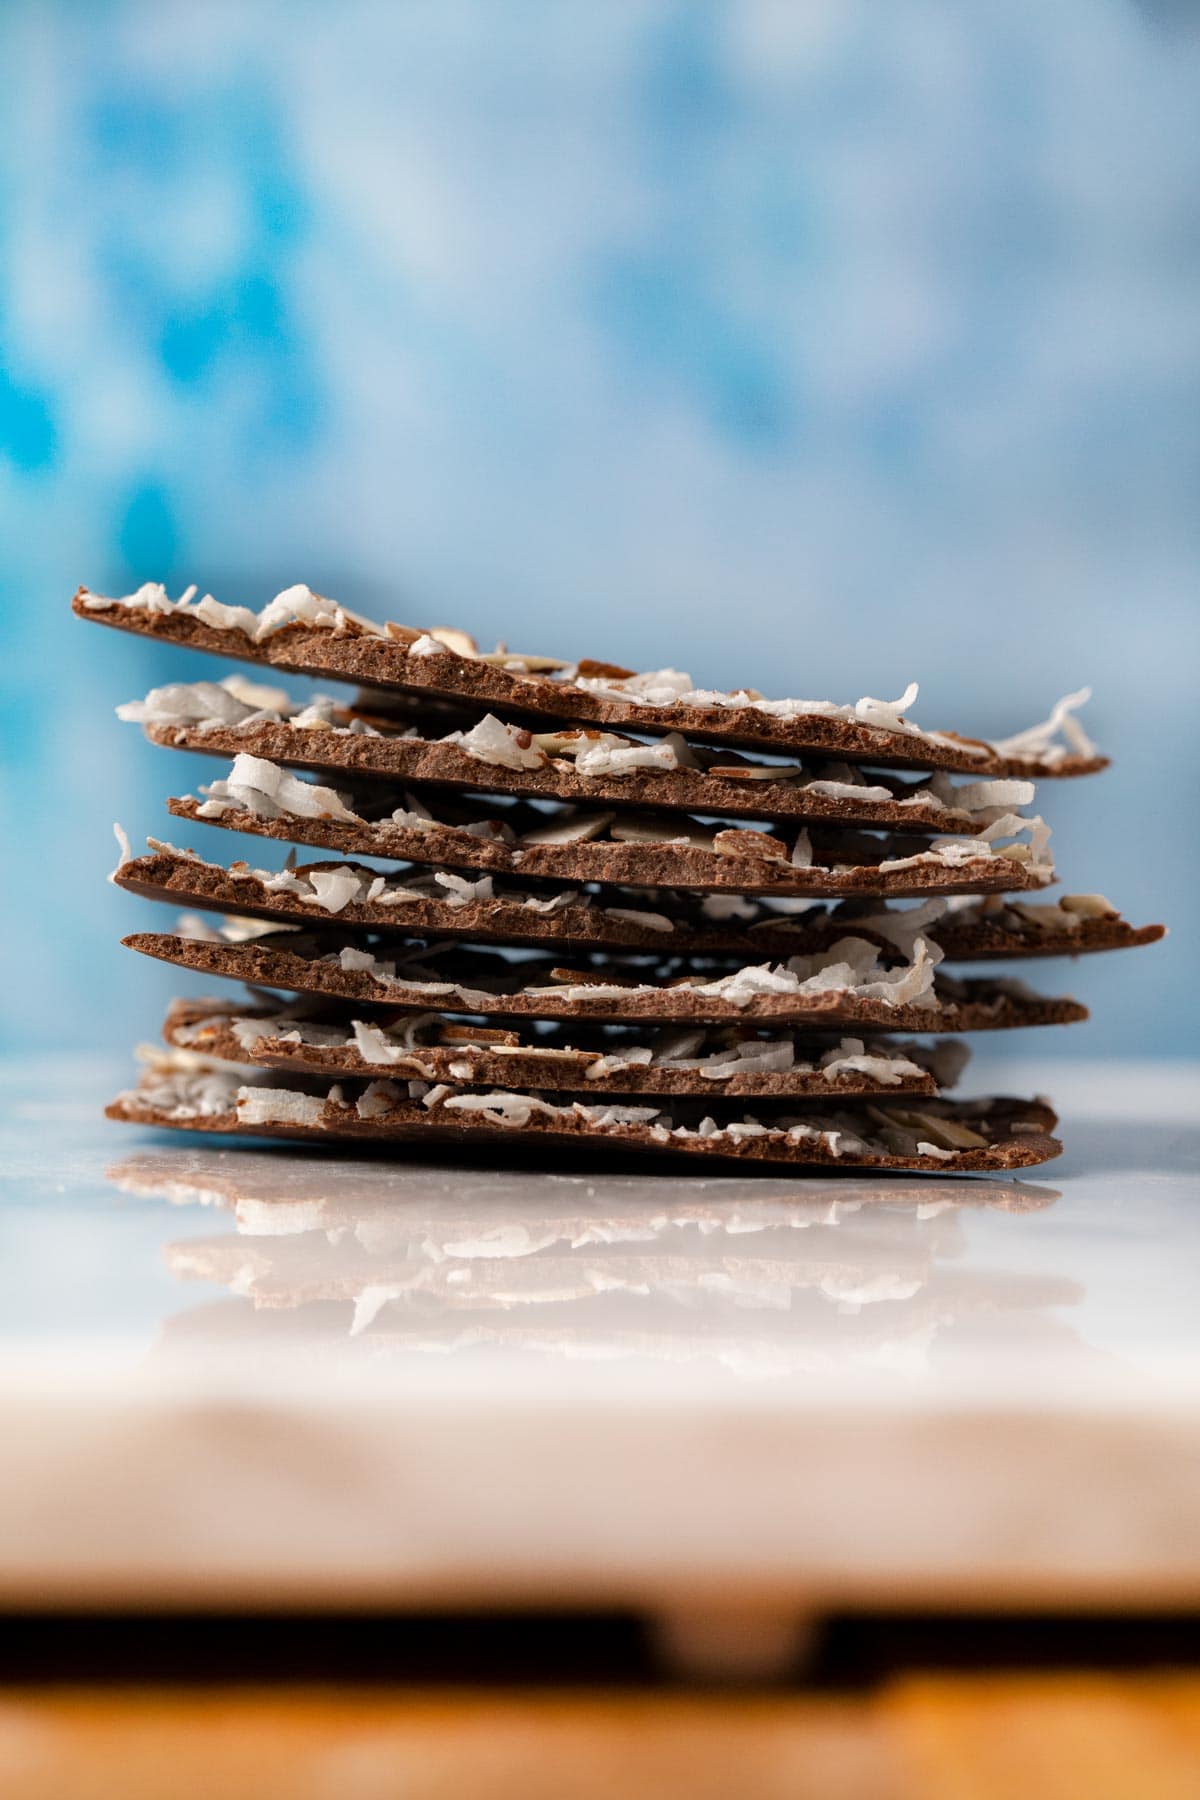 Coconut Almond Chocolate Bark pieces in stack